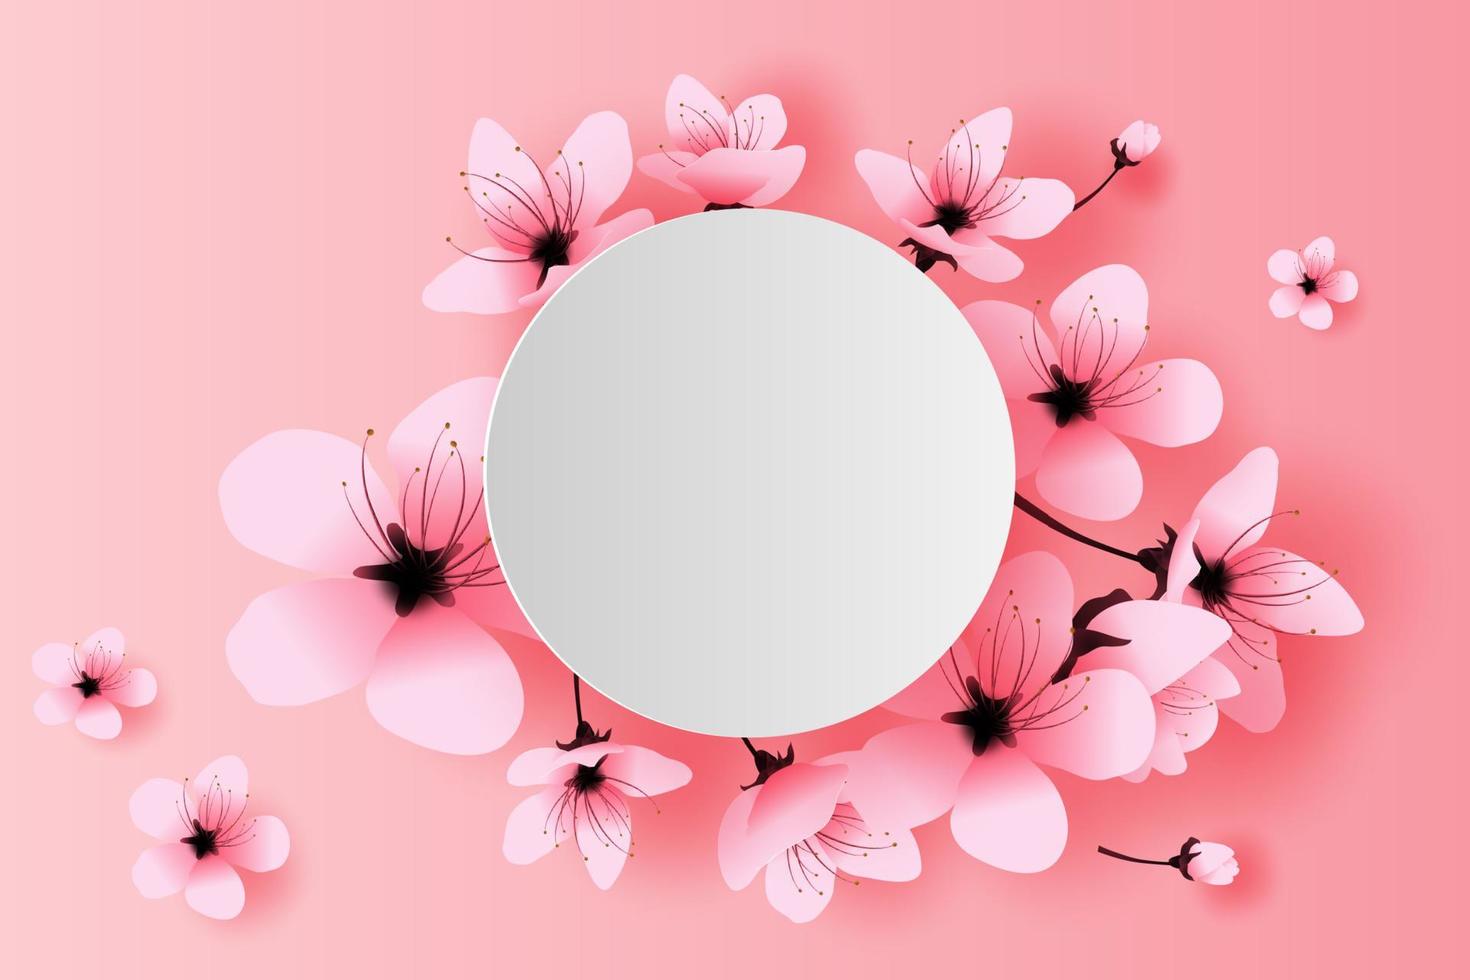 illustration of paper art and craft white circle spring season cherry blossom concept,Springtime with sakura branch, Floral Cherry blossom with pink flowers on place text space background,vector. vector